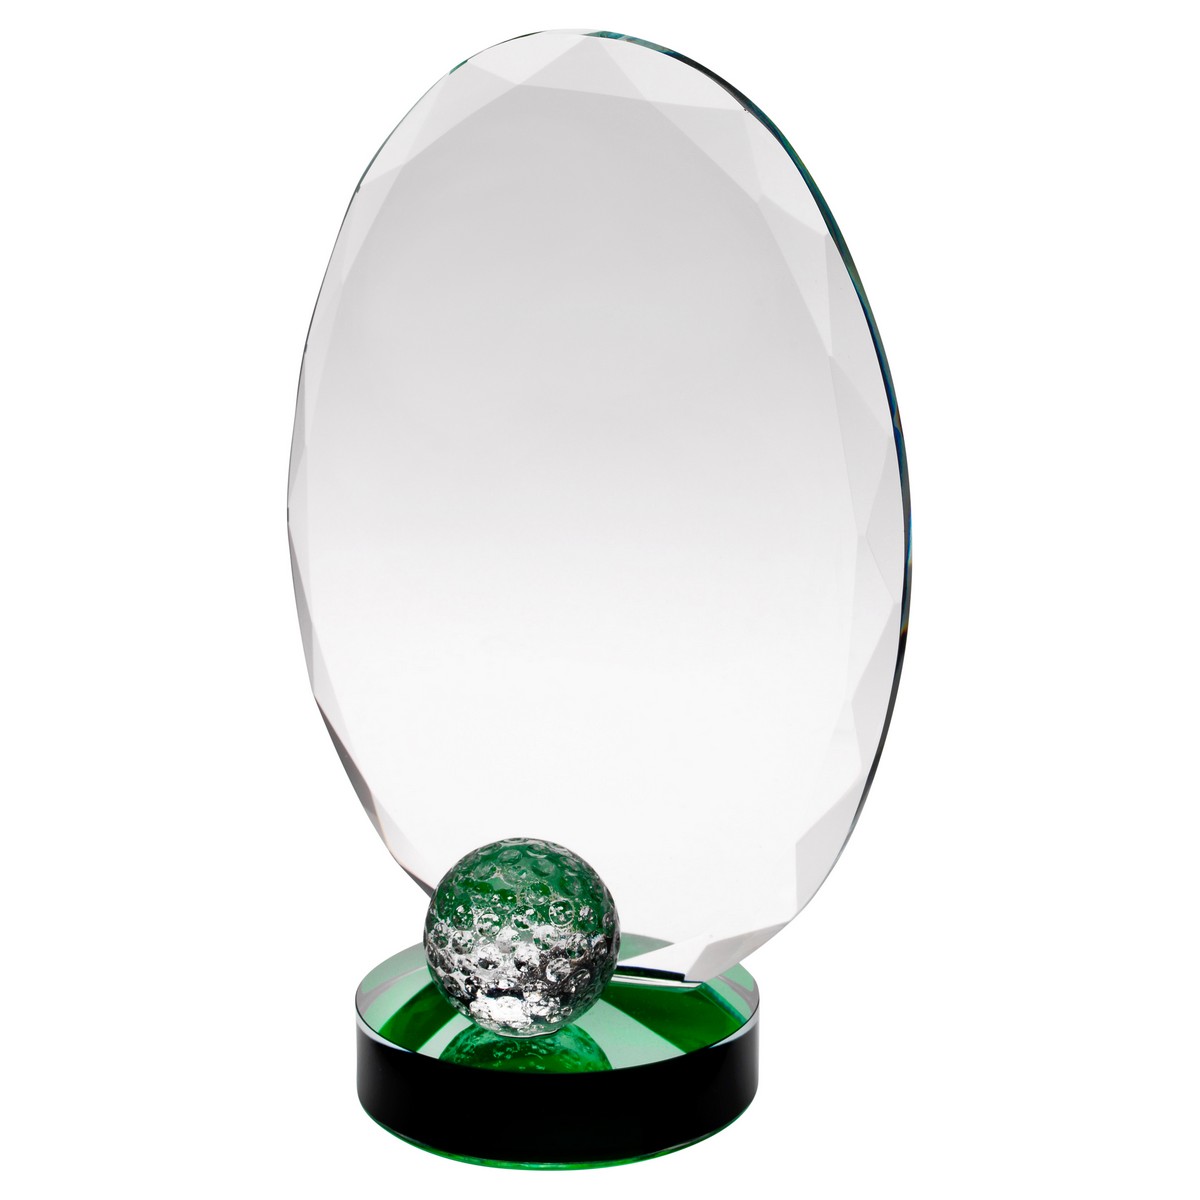 CLEAR GLASS OVAL AND GOLF BALL WITH GREEN HIGHLIGHTS (10MM THICK)